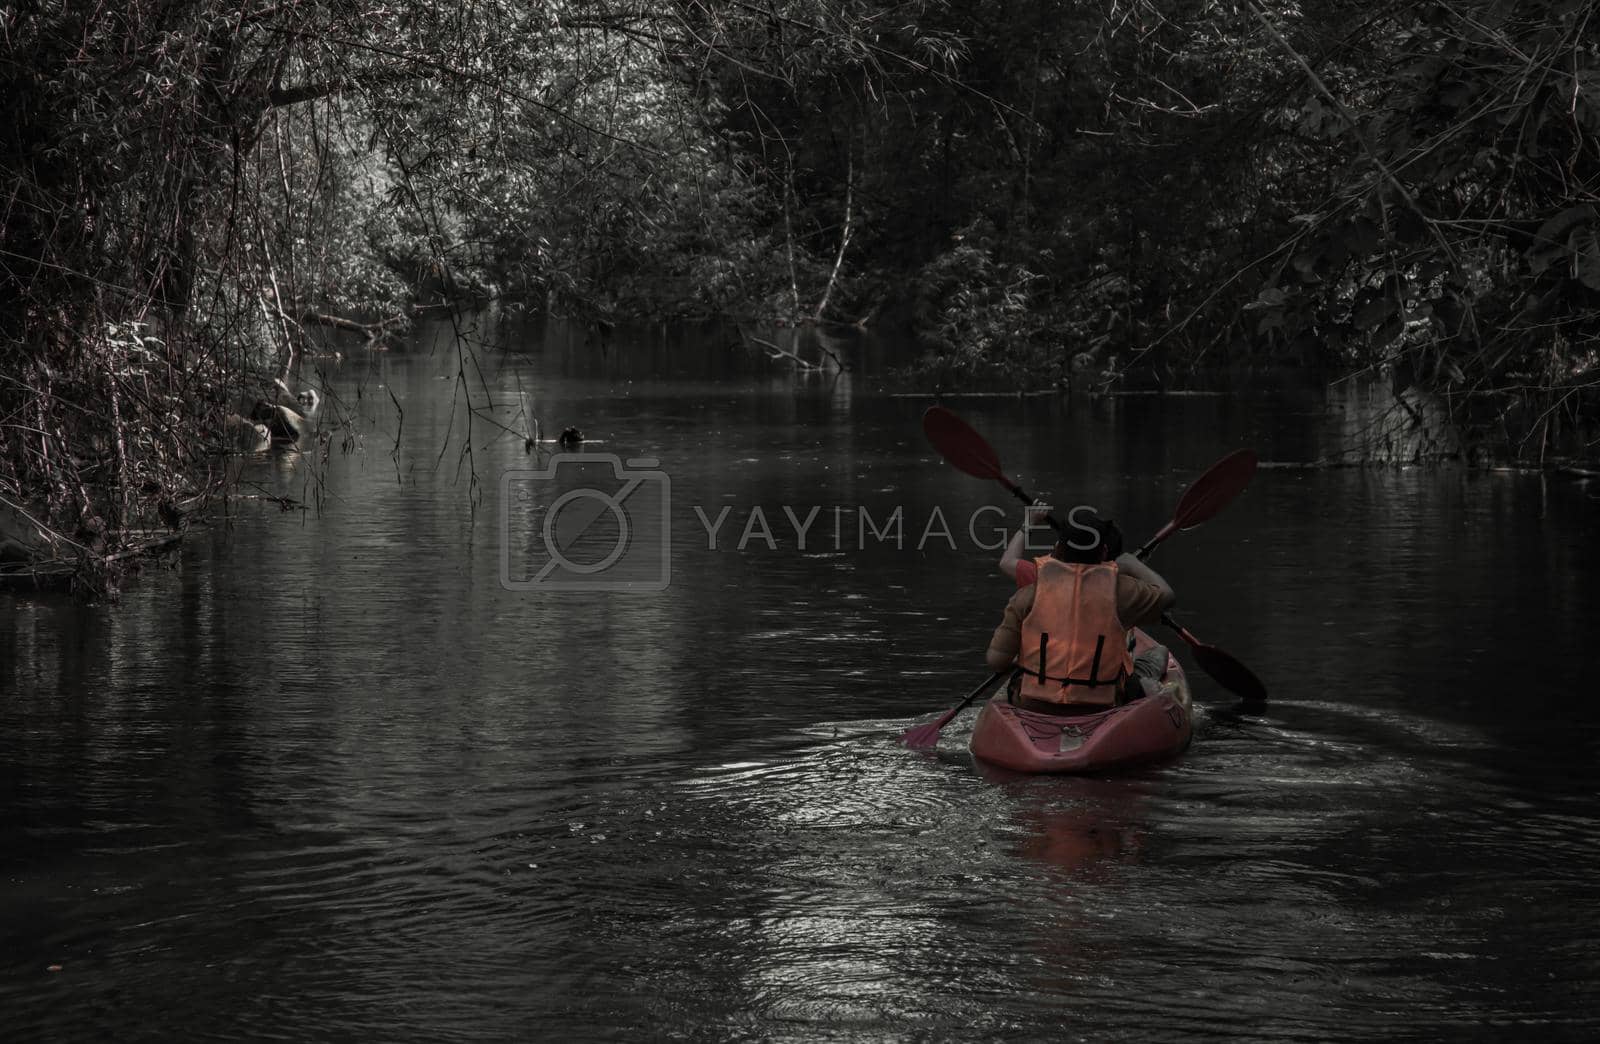 Nakhon Ratchasima, Thailand. Mar - 20, 2022 : Rear view of young couple Woman and man. Adventurous people having fun together while red kayaking on brook in forest. Having fun in leisure activity, Nature and Tourist attraction concept. No focus, specifically.